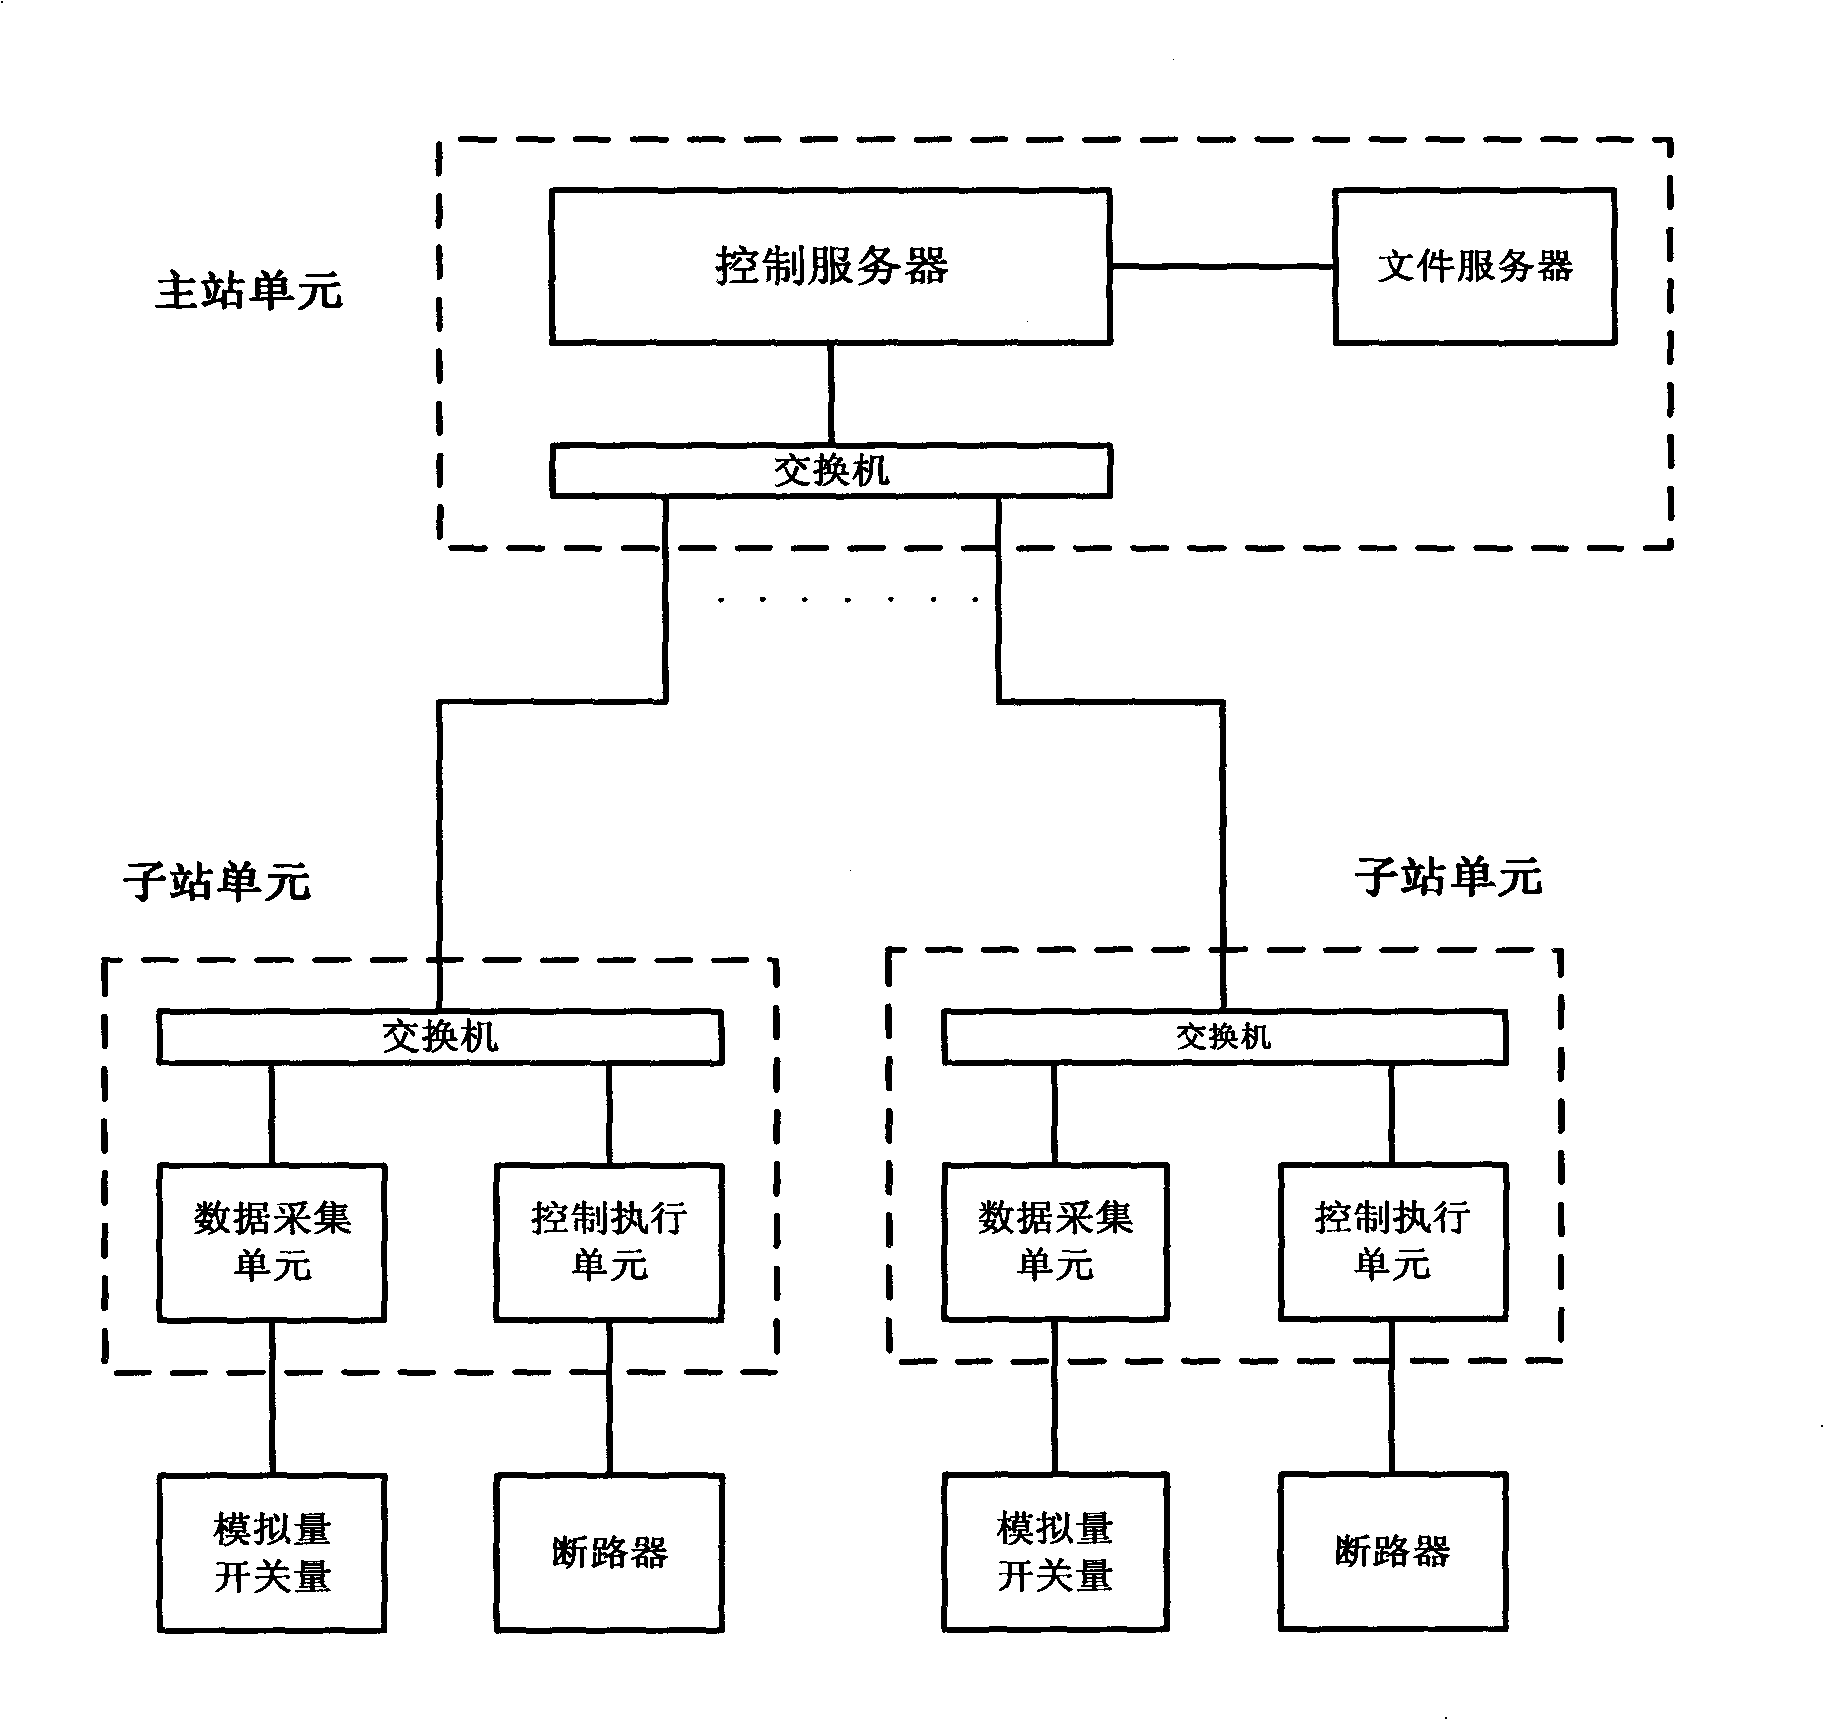 Protection control system and method base on electric network synthesis information